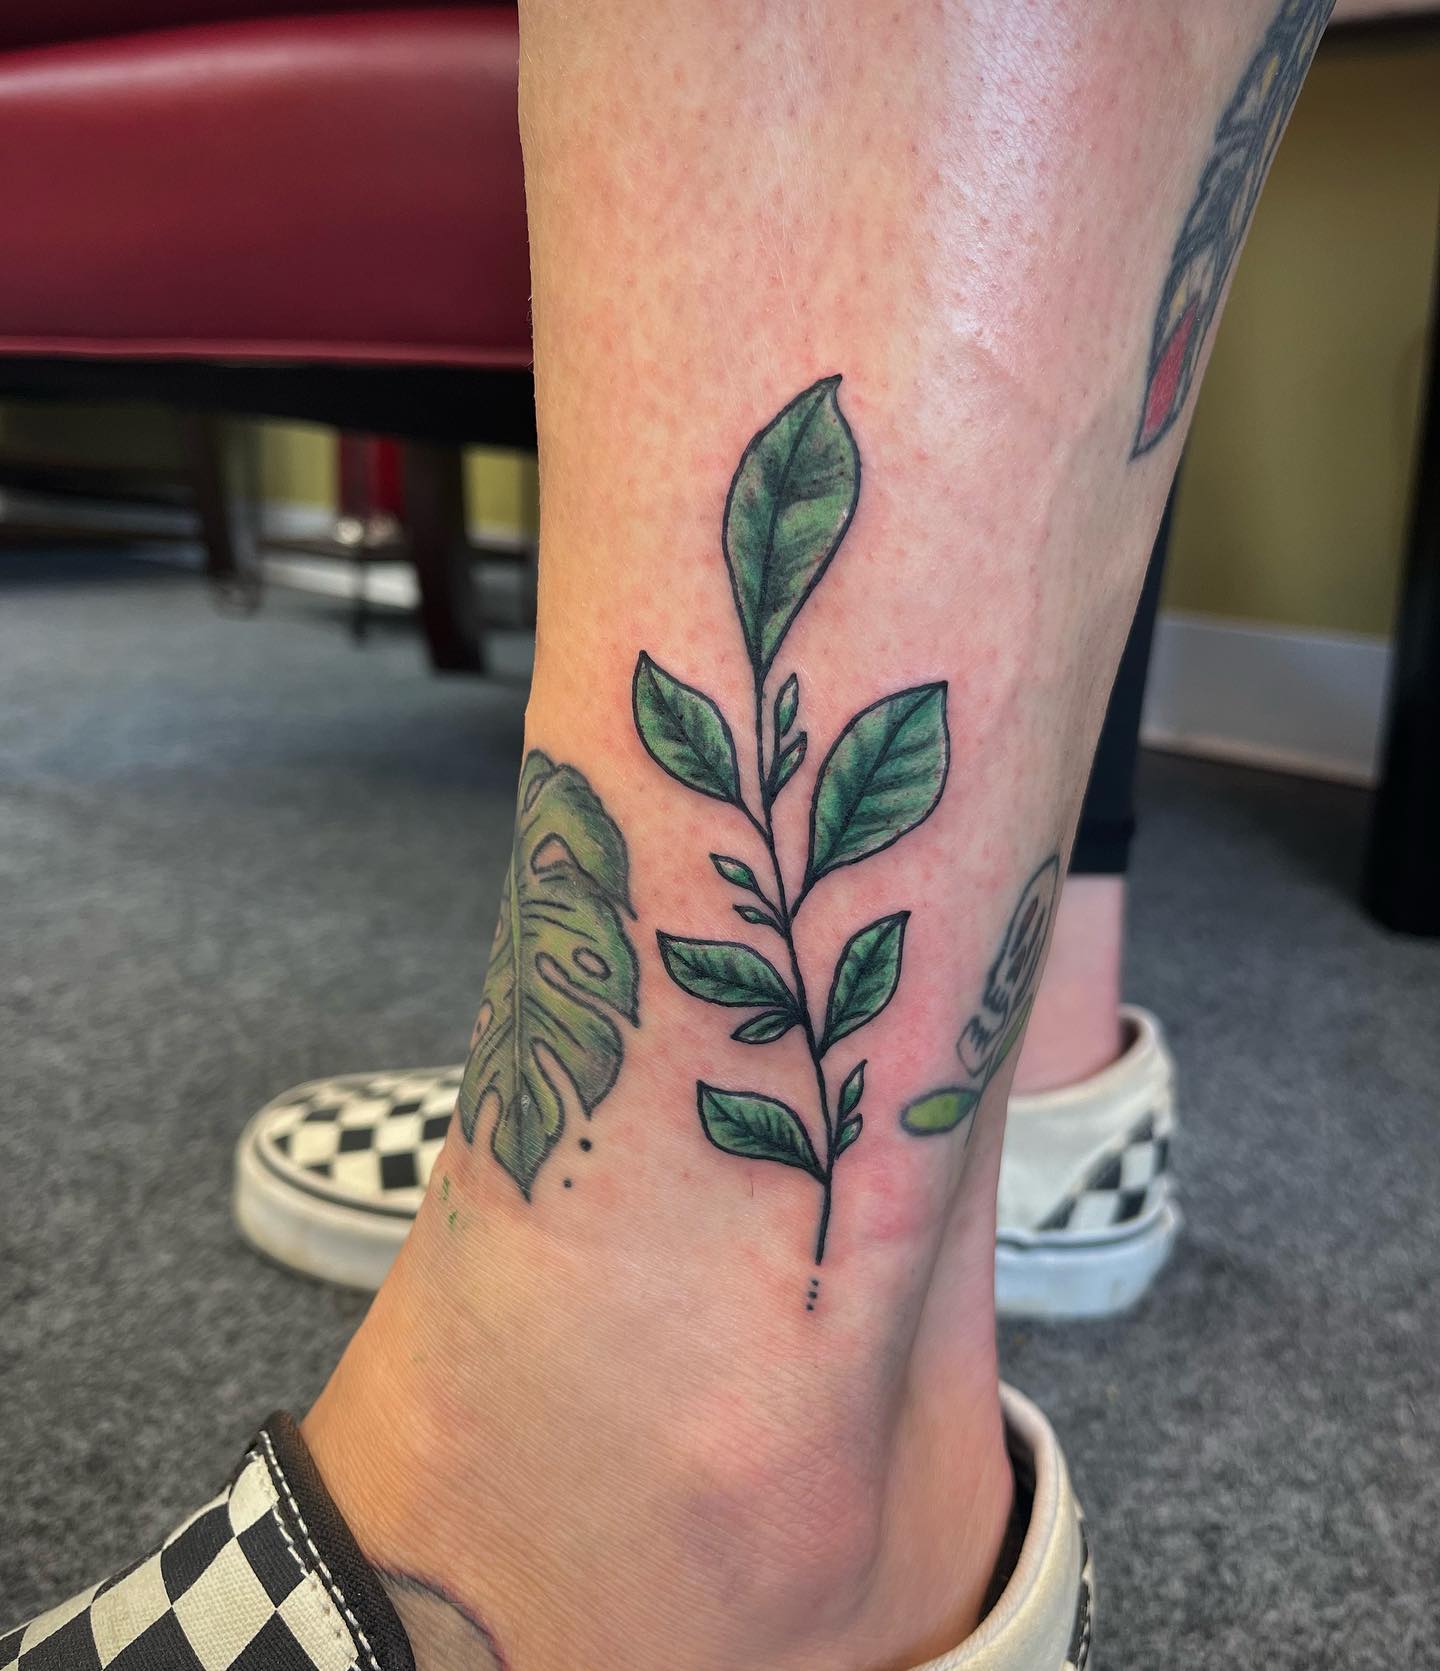 Dark green leaves will make you stand out from the crowd even if it is placed on your ankle. If you are a nature lover, you should try it out, for sure.